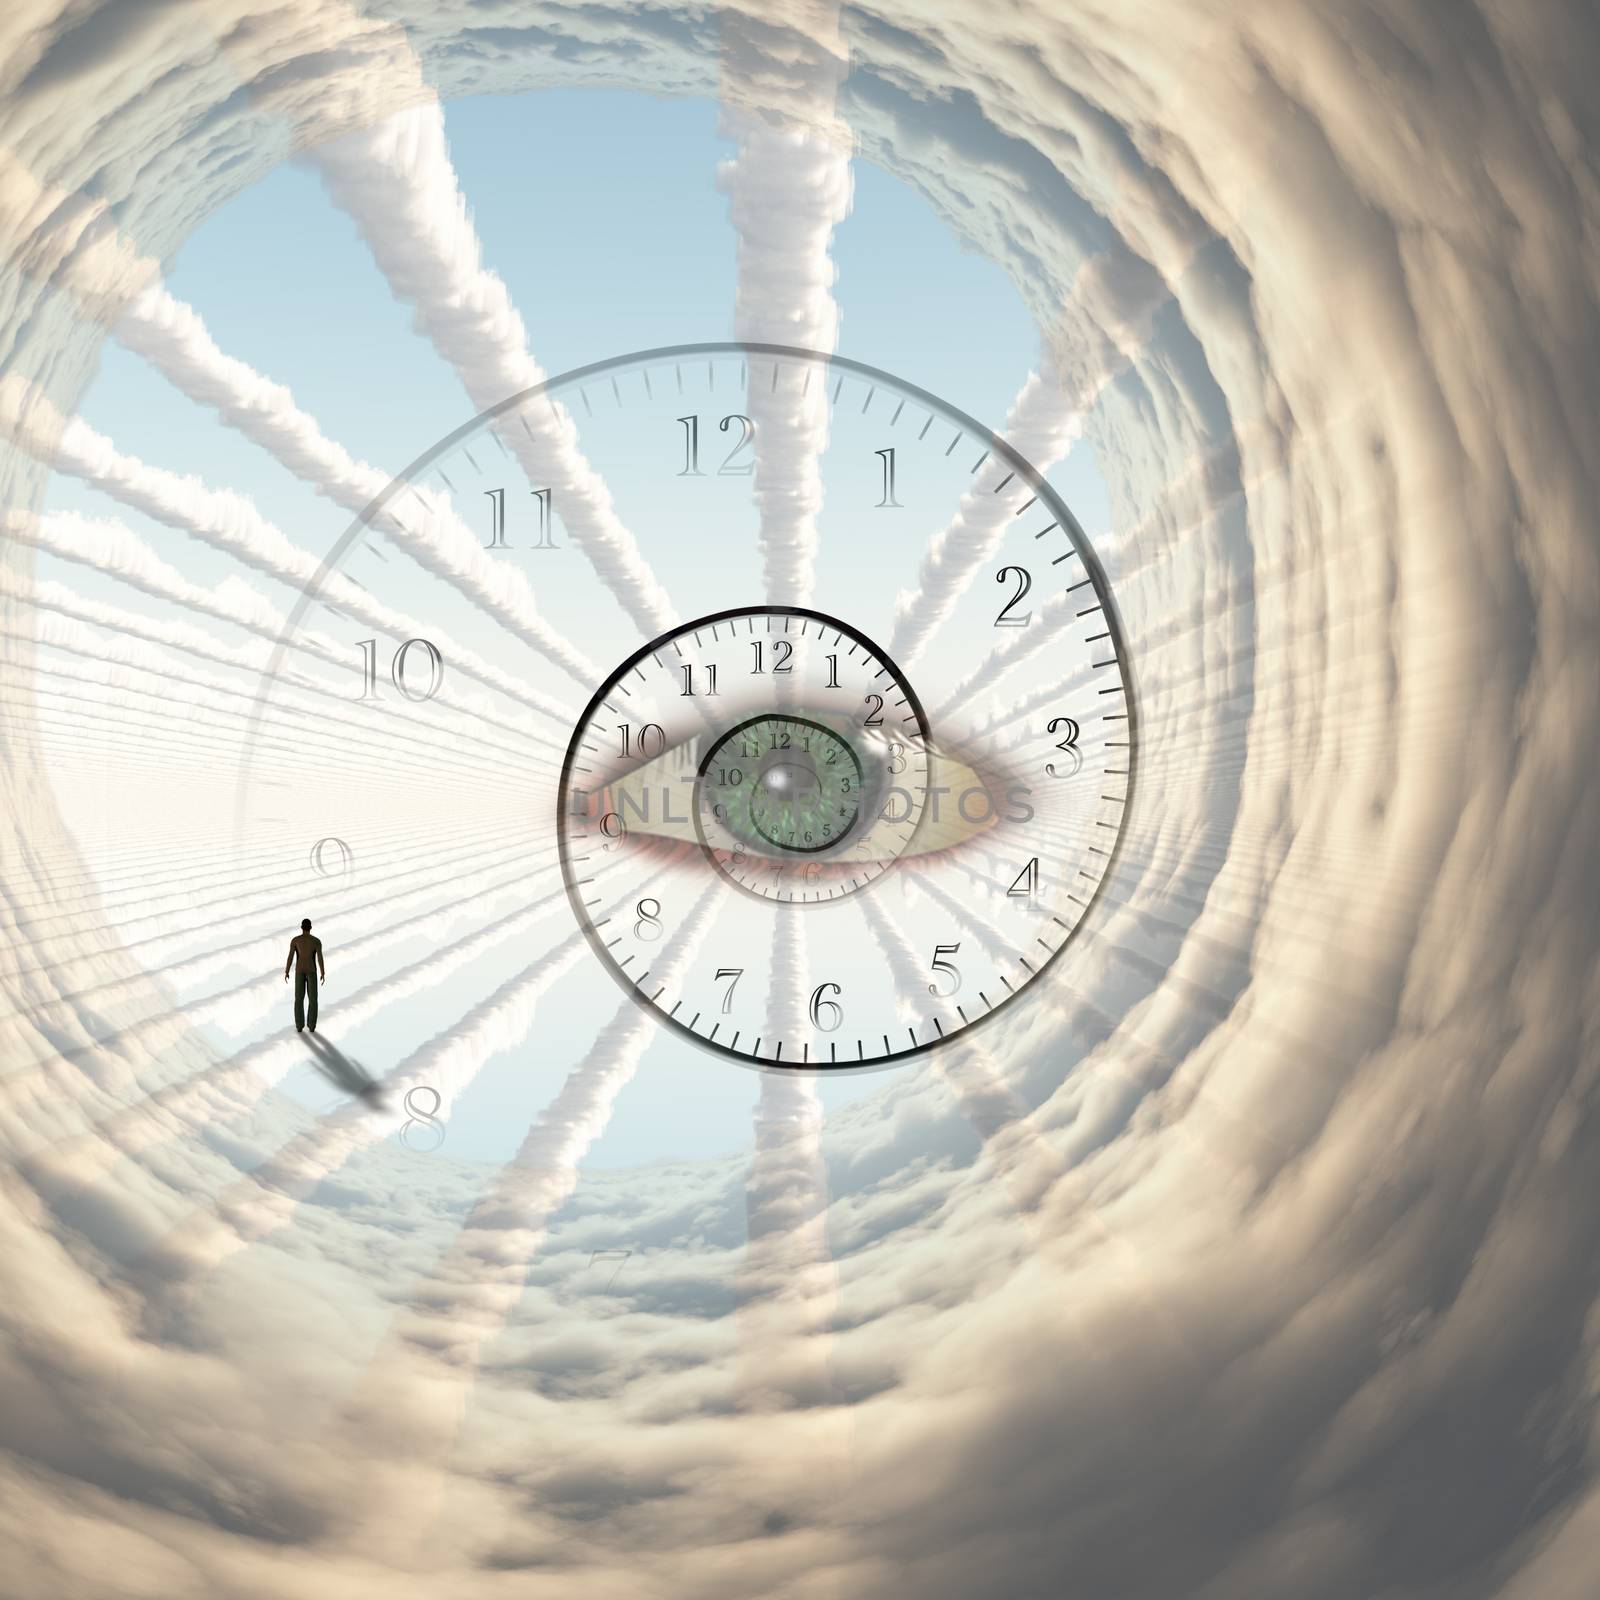 Figure of man in cloud's tunnel. God's eye and spiral of time.